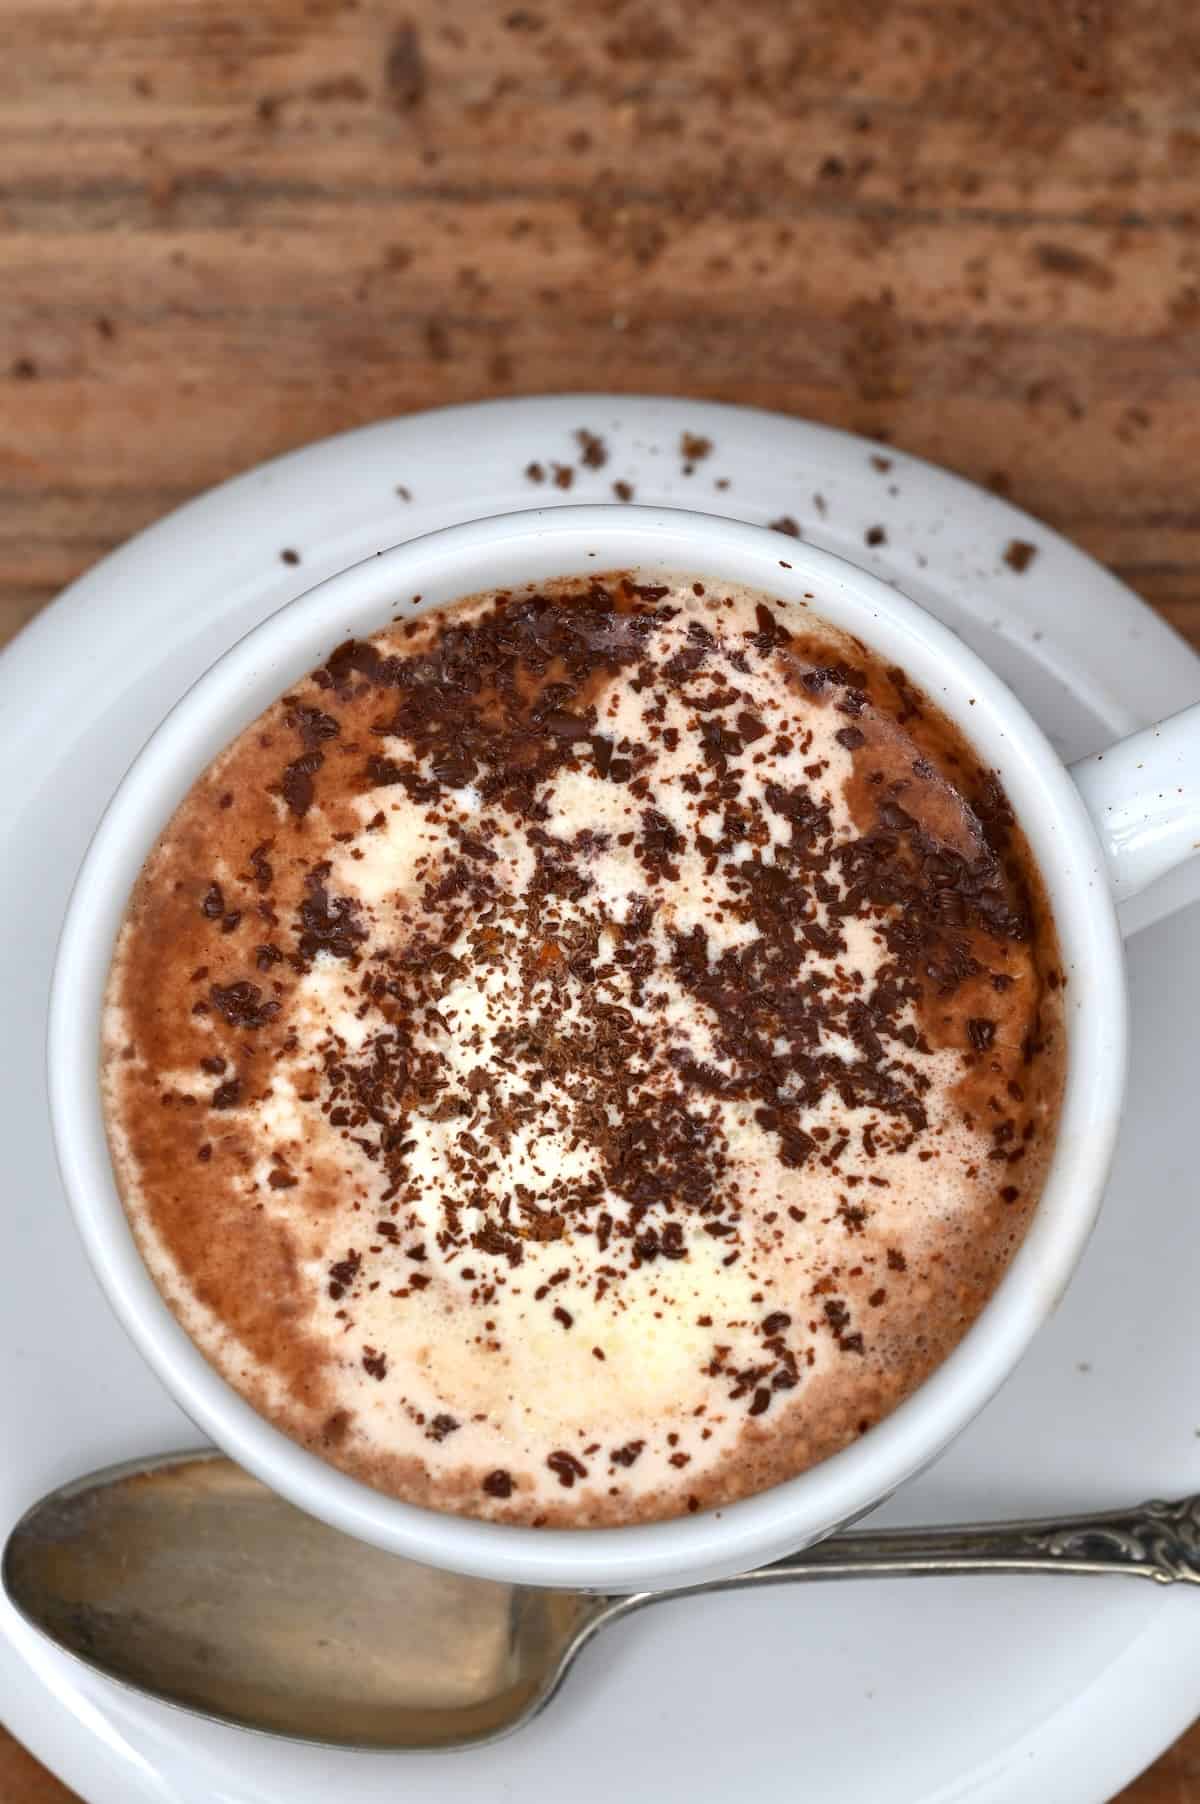 A cup of hot cocoa topped with chocolate shavings